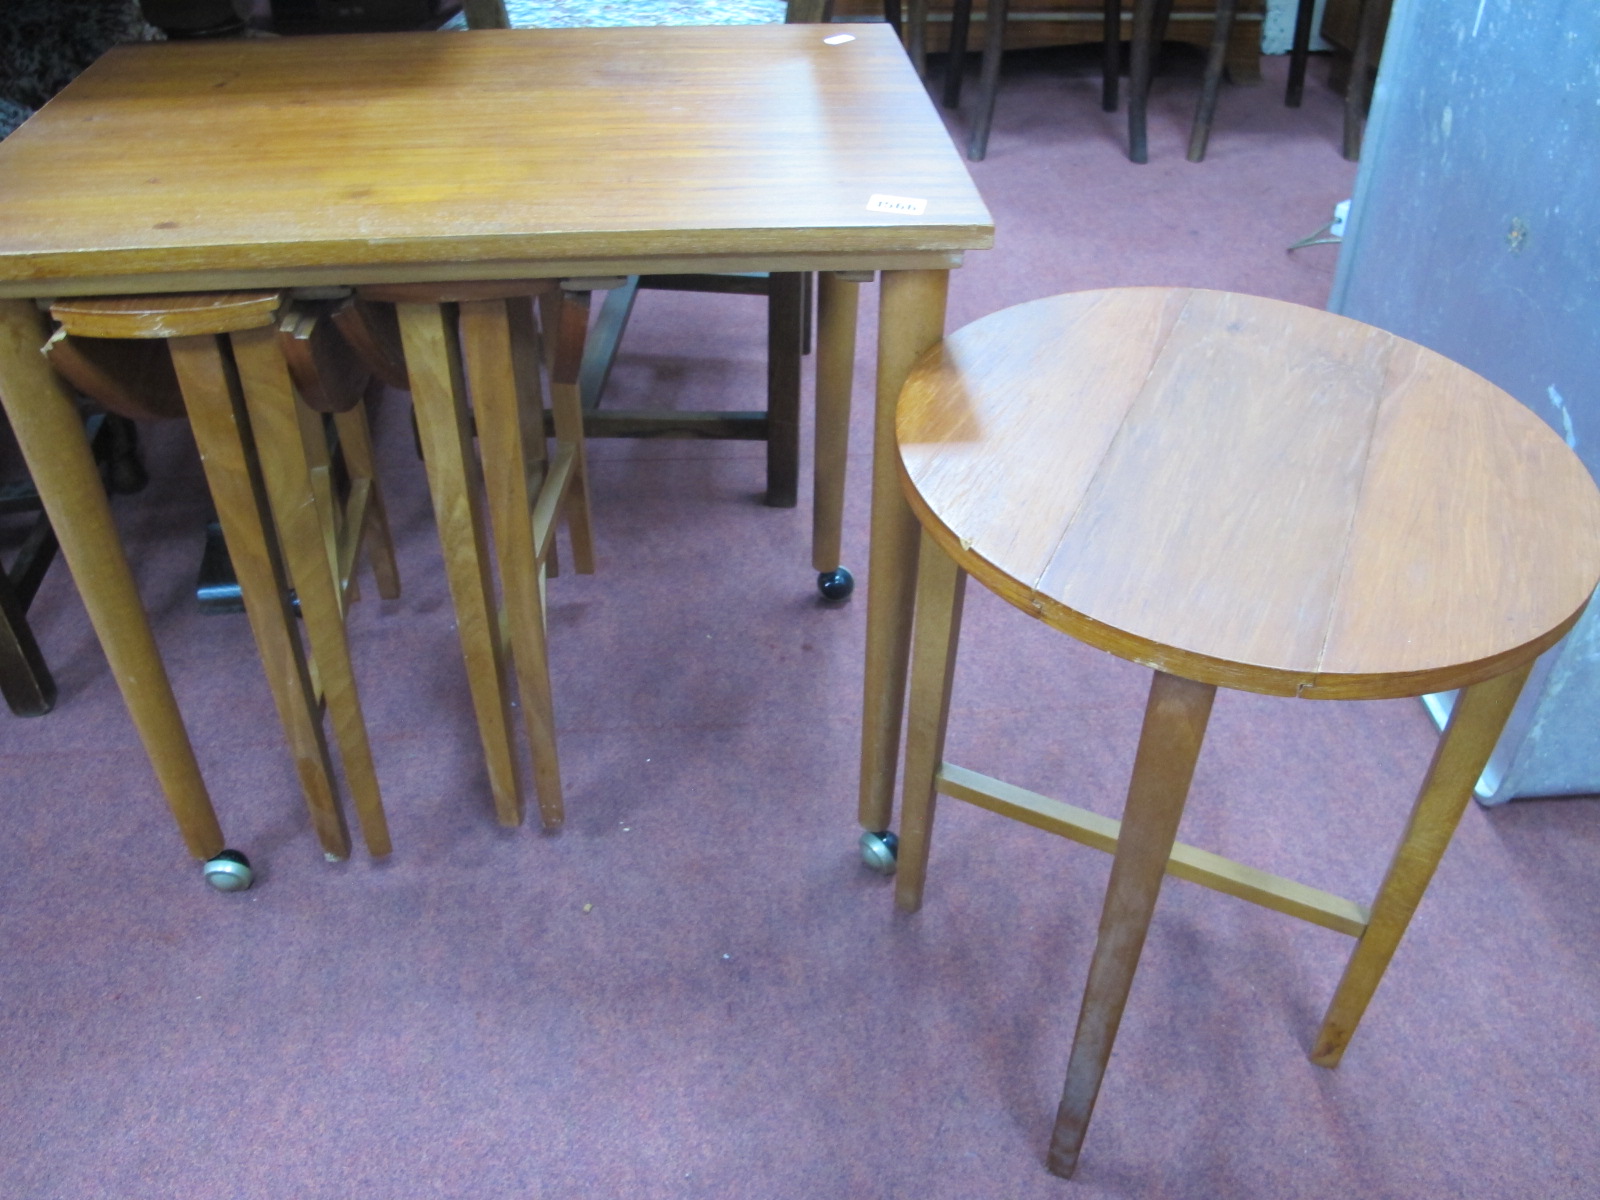 A Teak Wood Nest of Tables, with three folding tables.